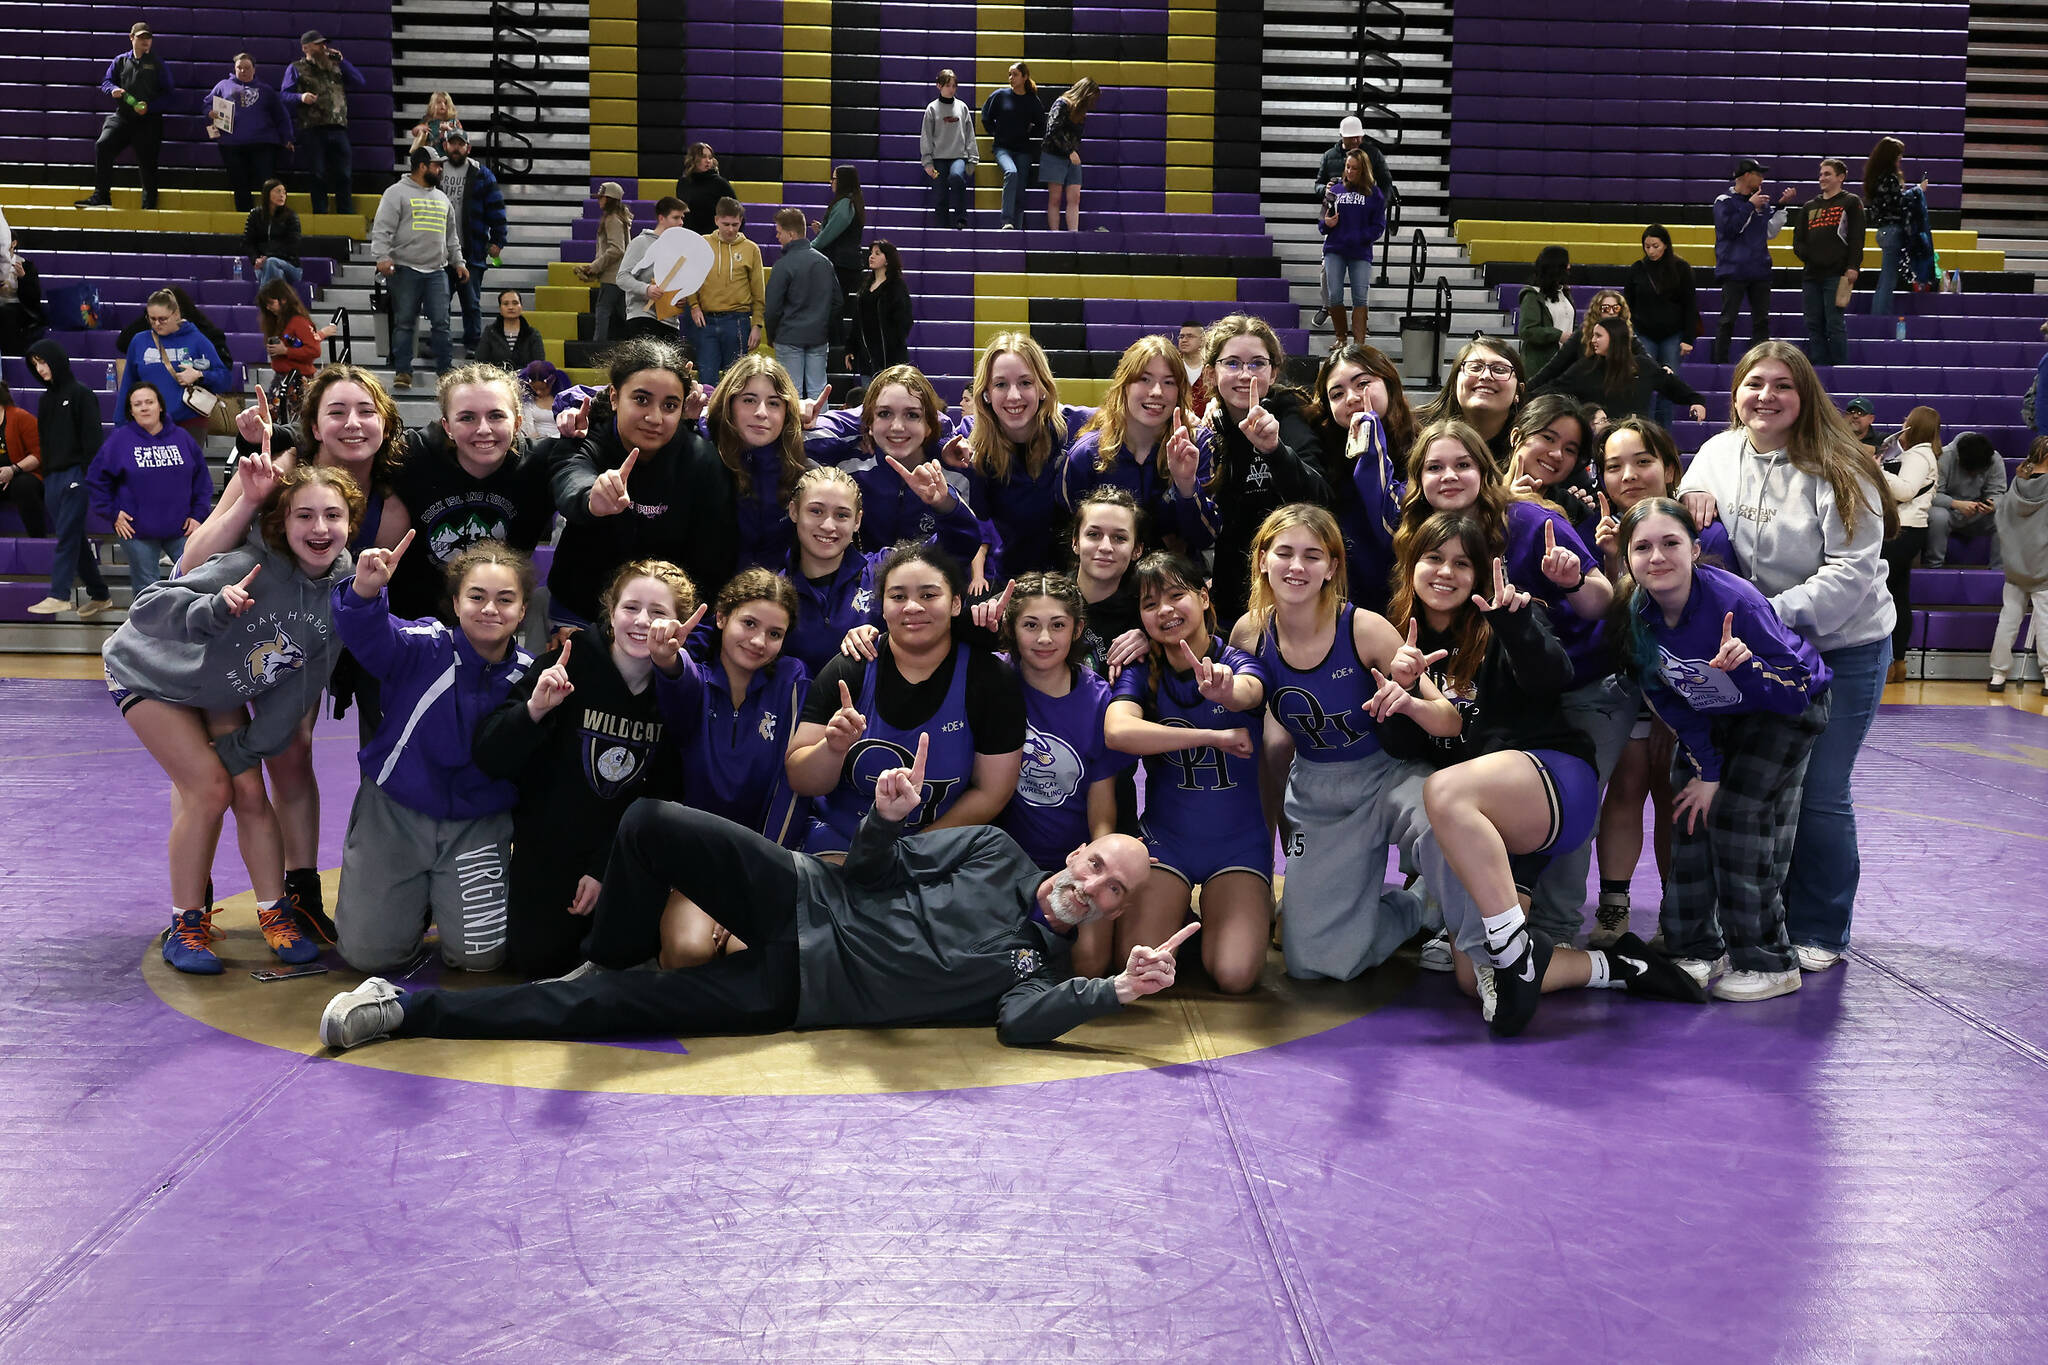 Oak Harbor High School’s girls wrestling team celebrates winning the Northwest Conference championship Jan. 25. They are preparing to compete in the subregional tournament held this weekend at Oak Harbor High School. (Photo by John Fisken)